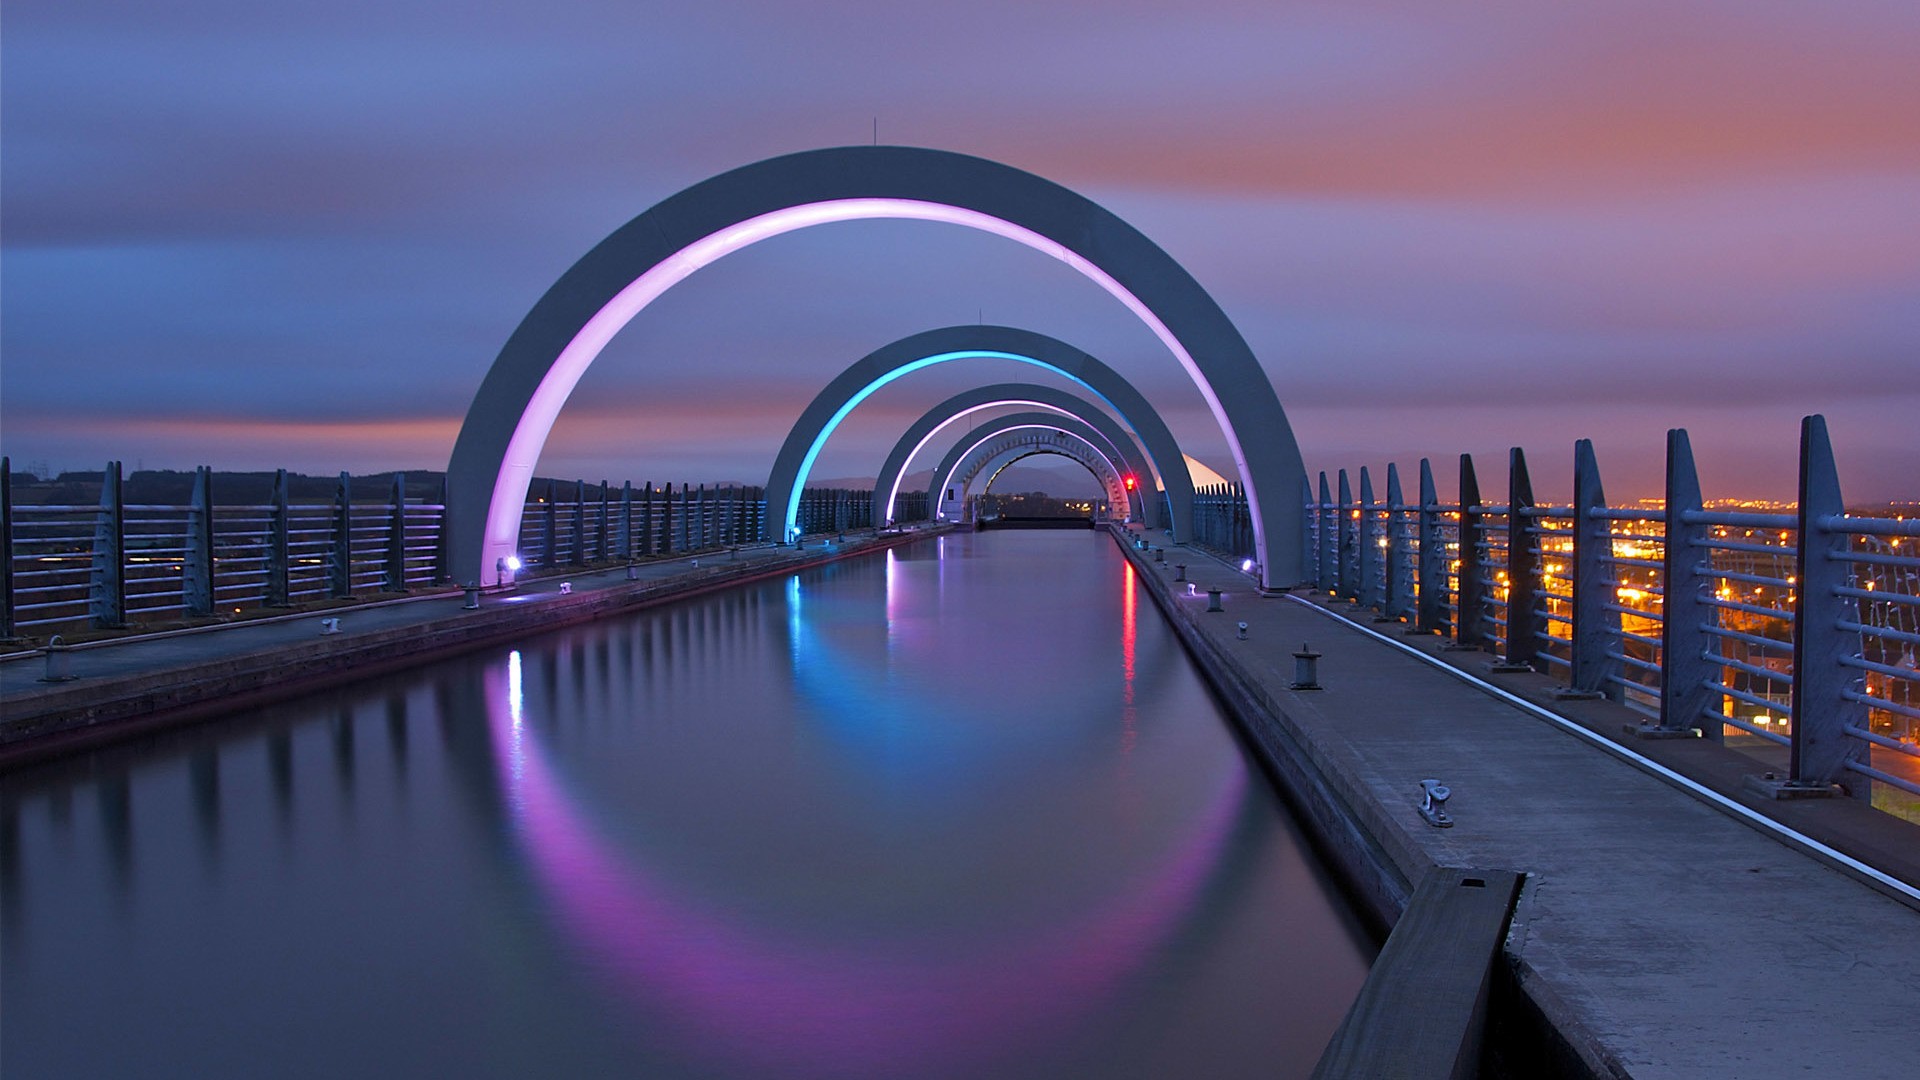 Architecture Water Canal Wheels Falkirk Wheel Scotland UK Reflection Fence Clouds Evening Lights Lon 1920x1080